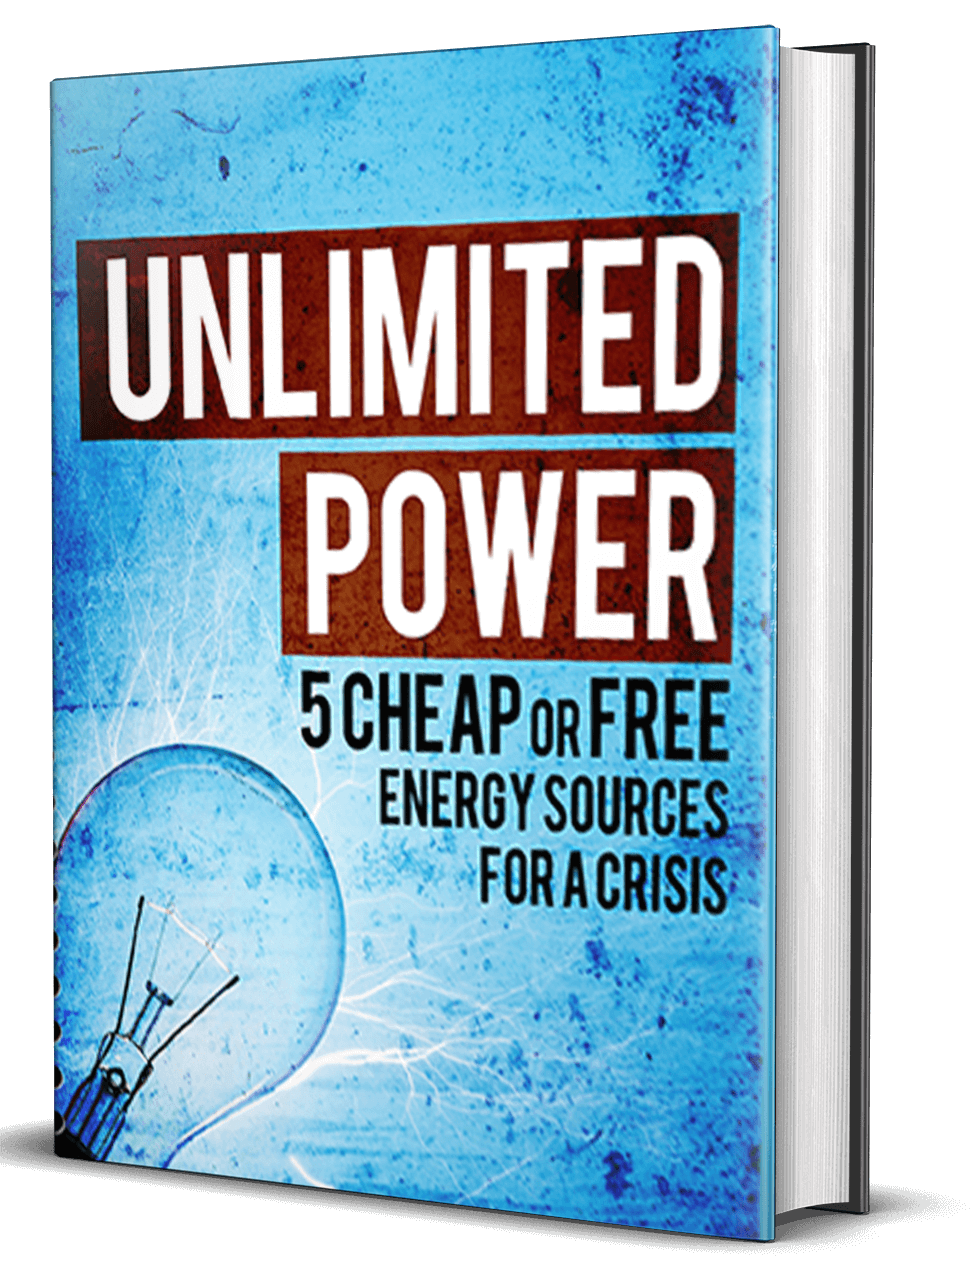 Unlimited power - five cheap or for free energy sources for a crisis